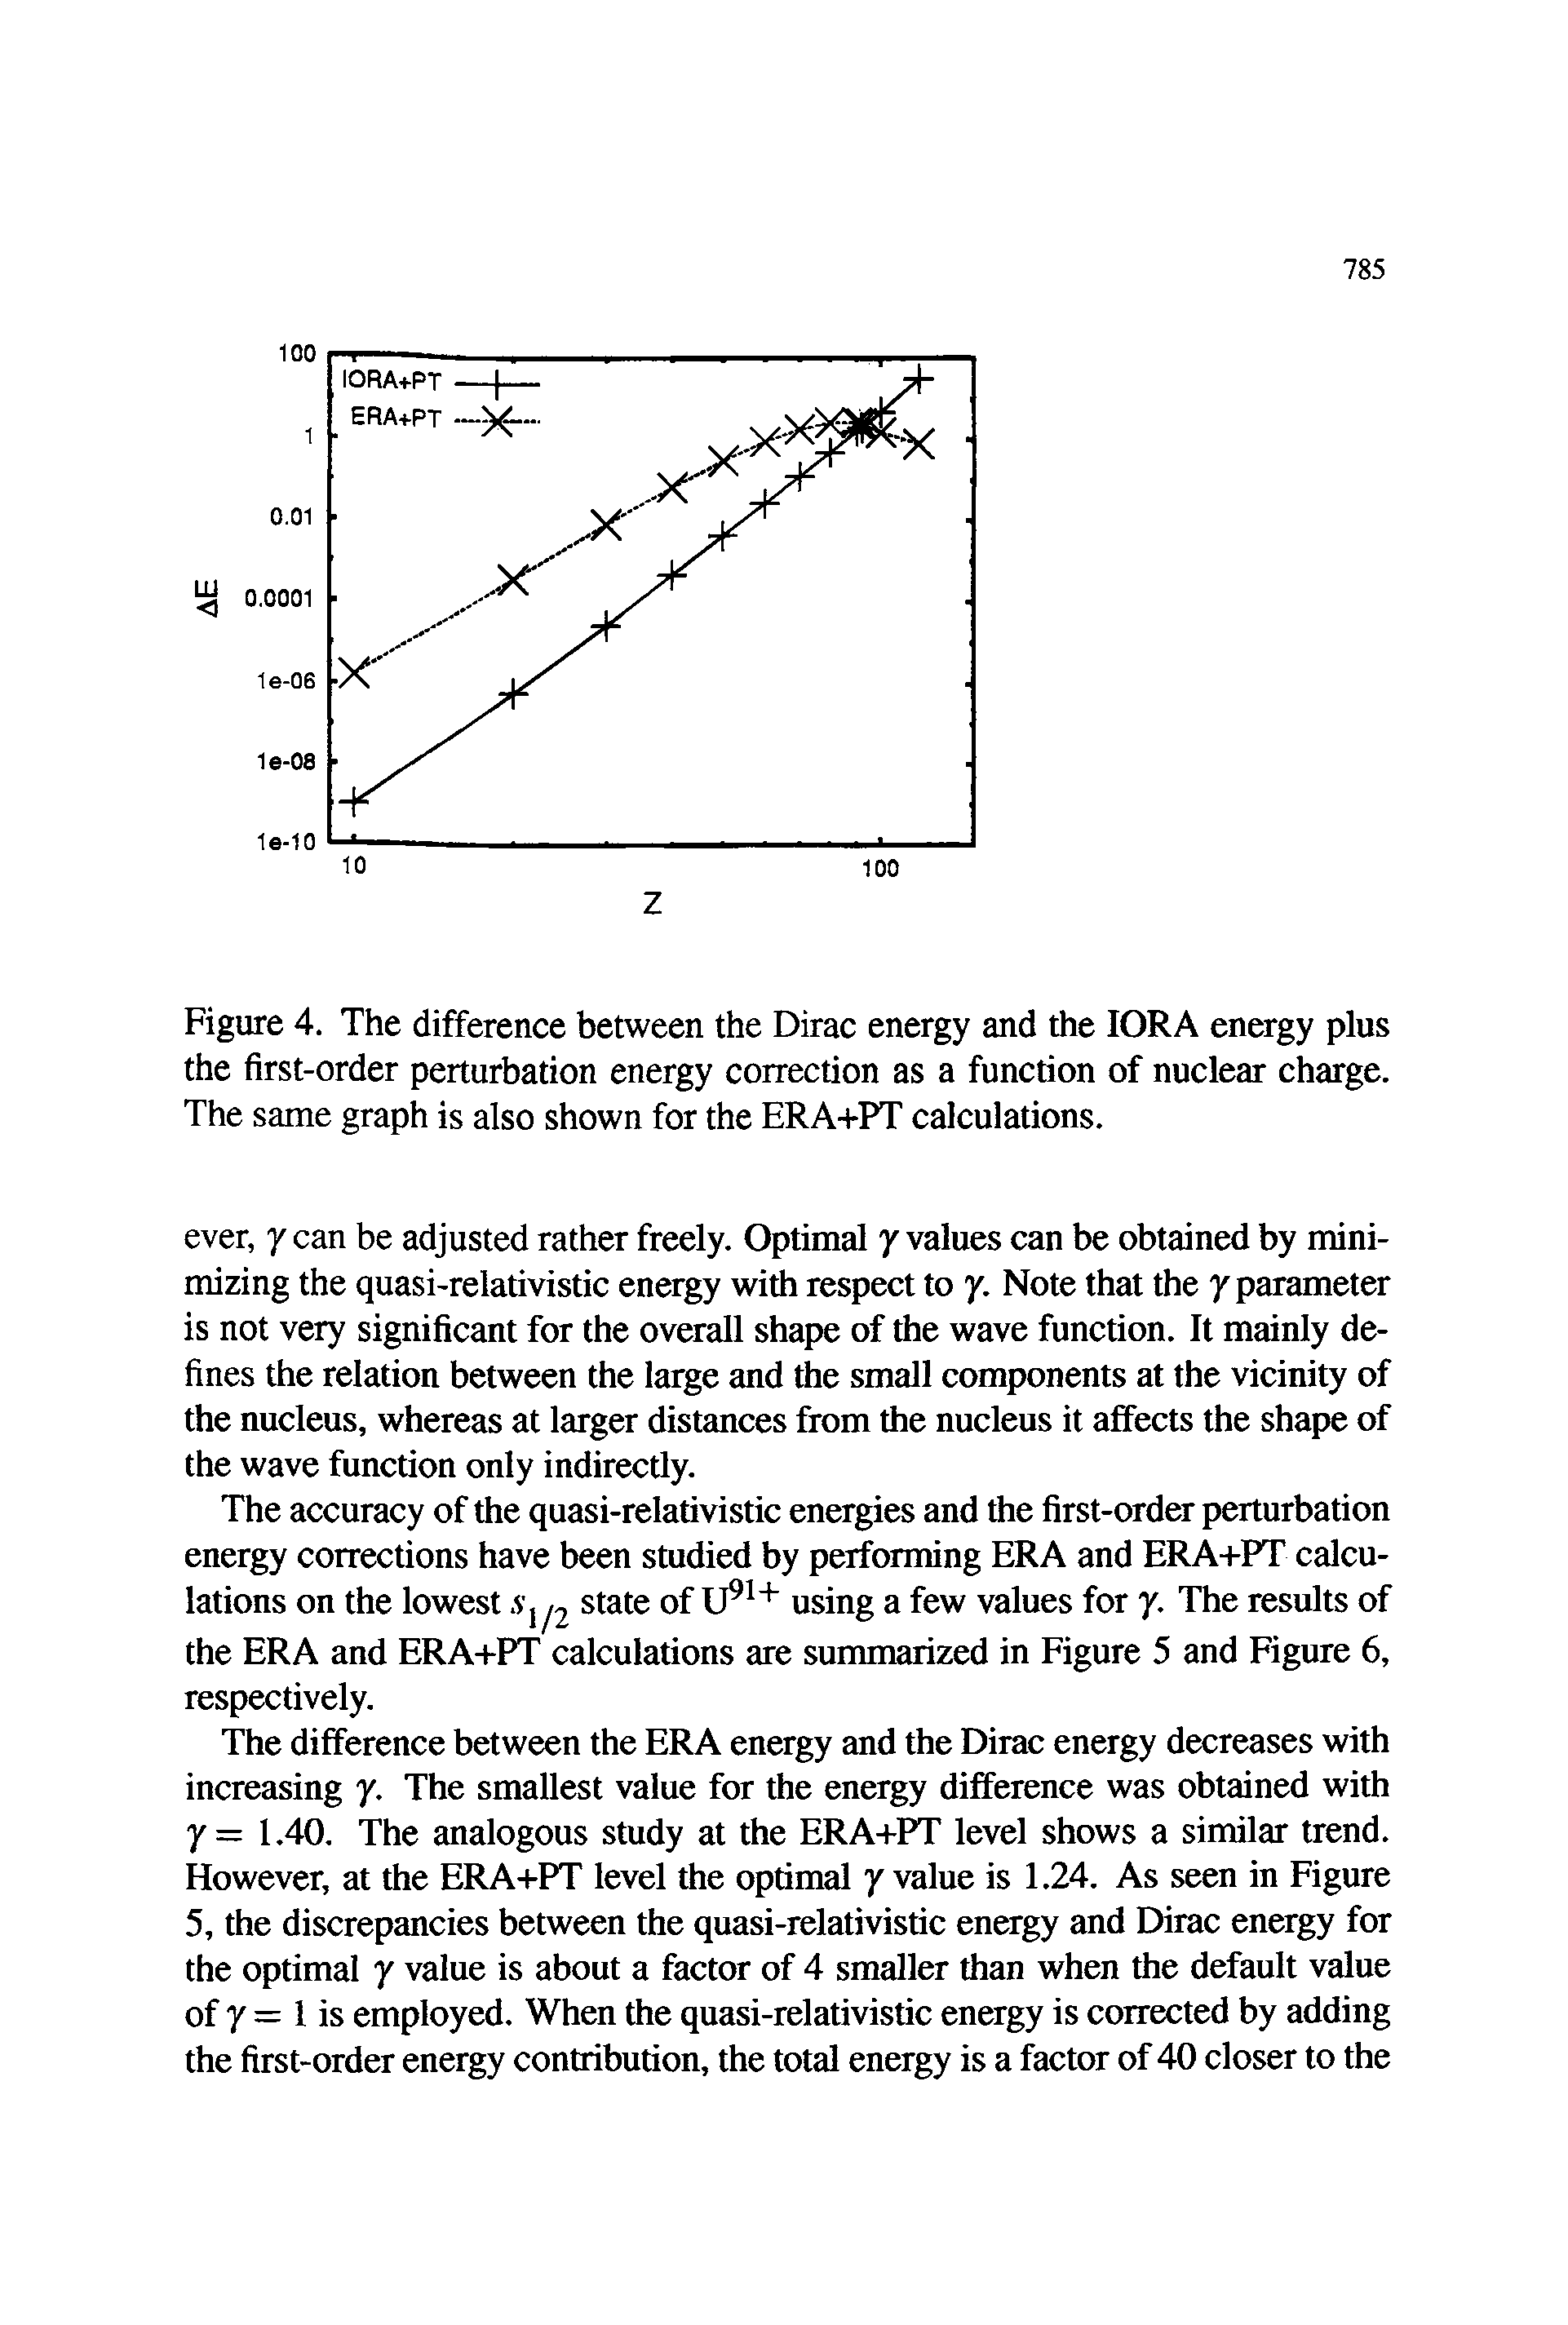 Figure 4. The difference between the Dirac energy and the lORA energy plus the first-order perturbation energy correction as a function of nuclear charge. The same graph is also shown for the ERA+PT calculations.